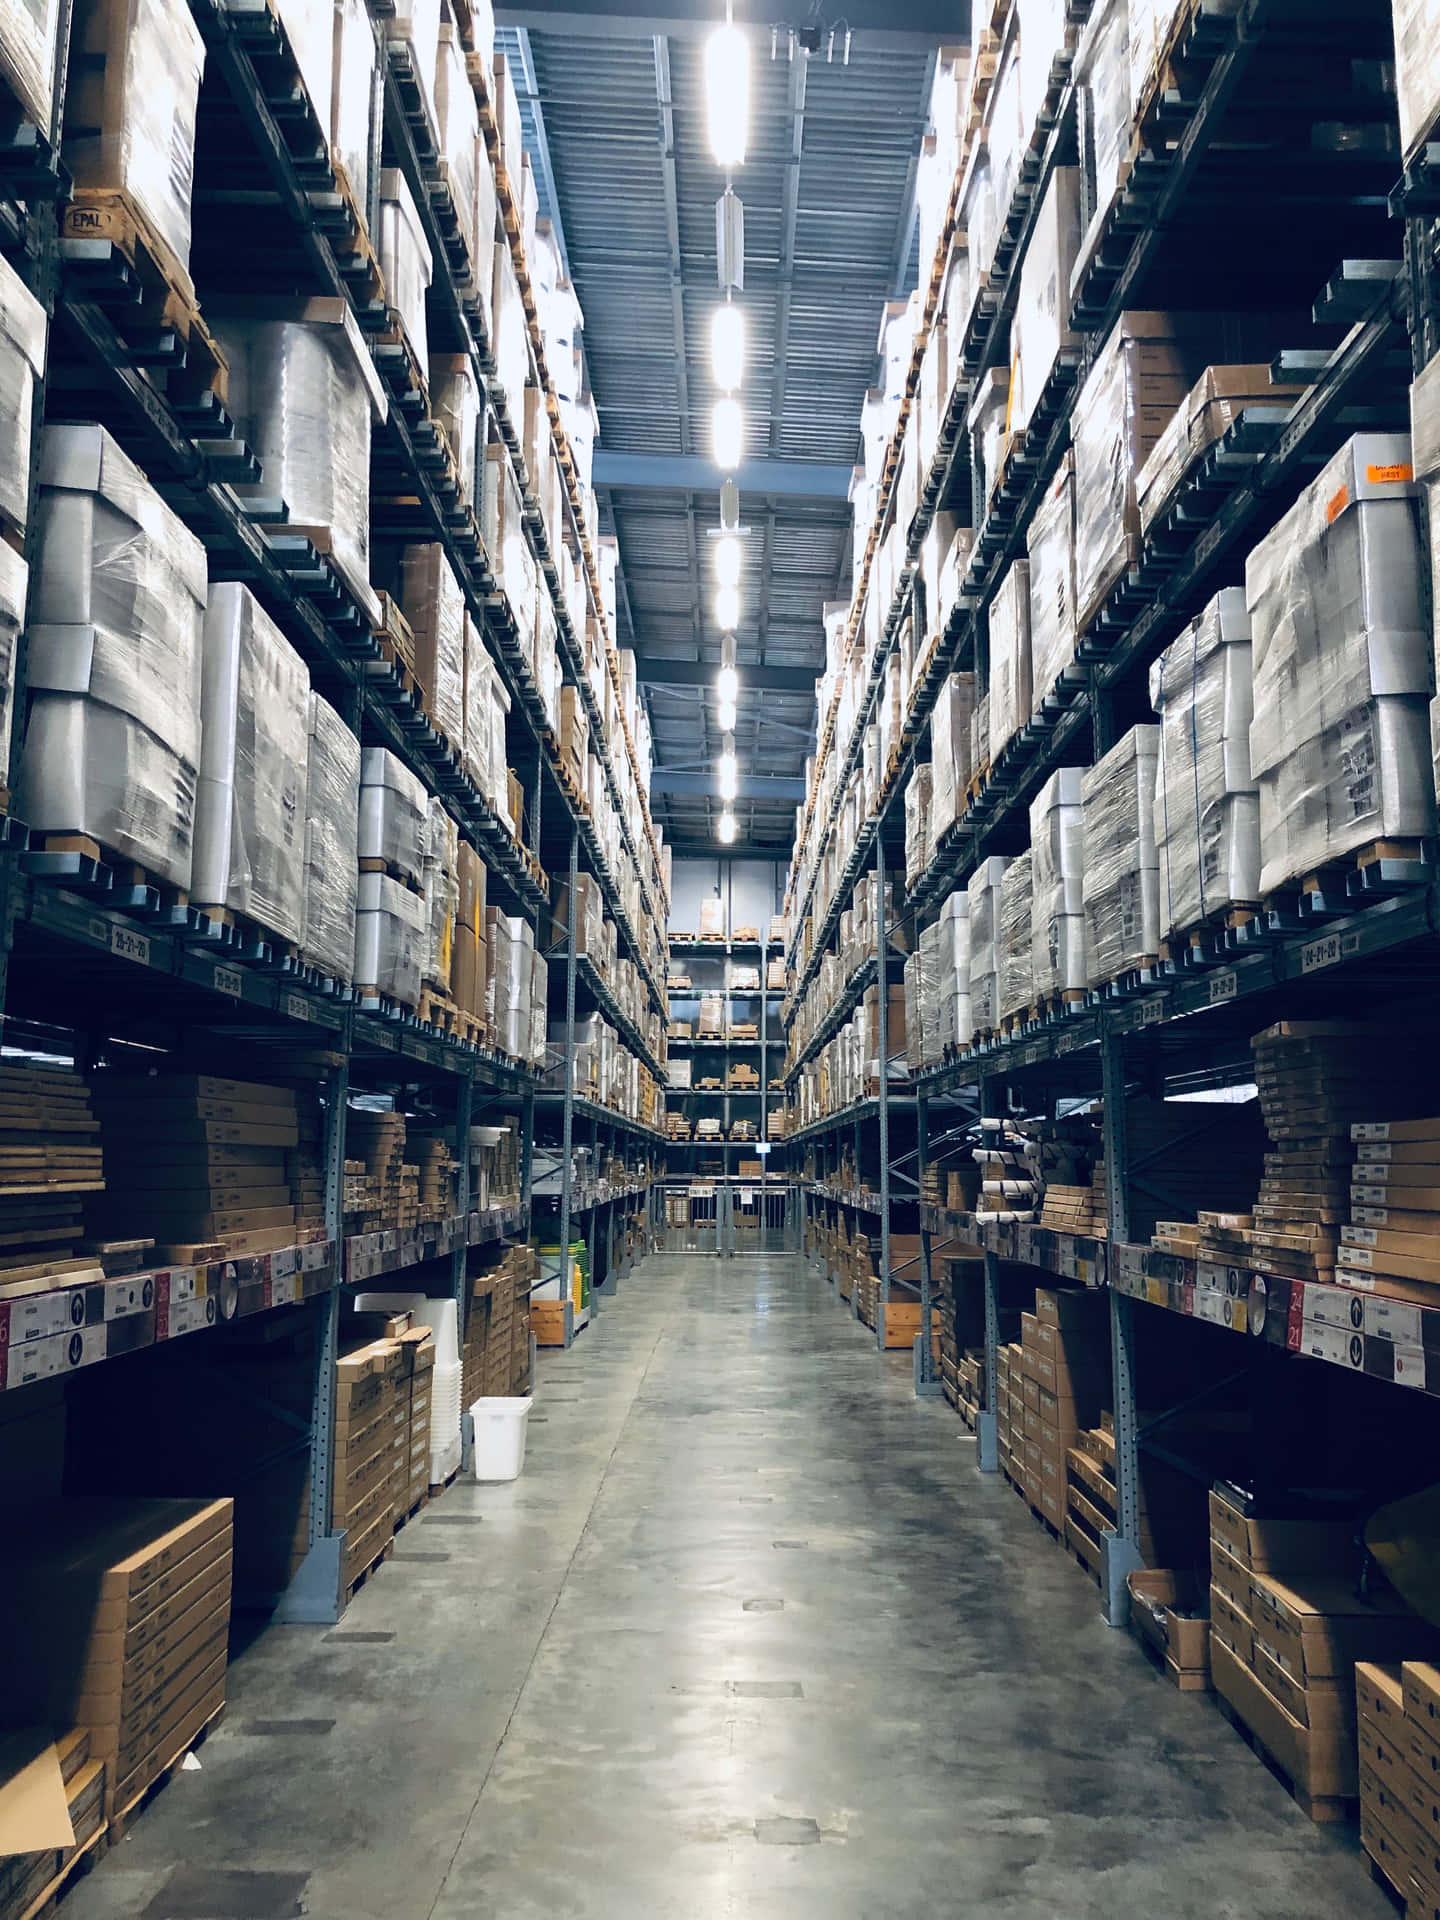 A Warehouse With Many Boxes And Boxes On The Shelves